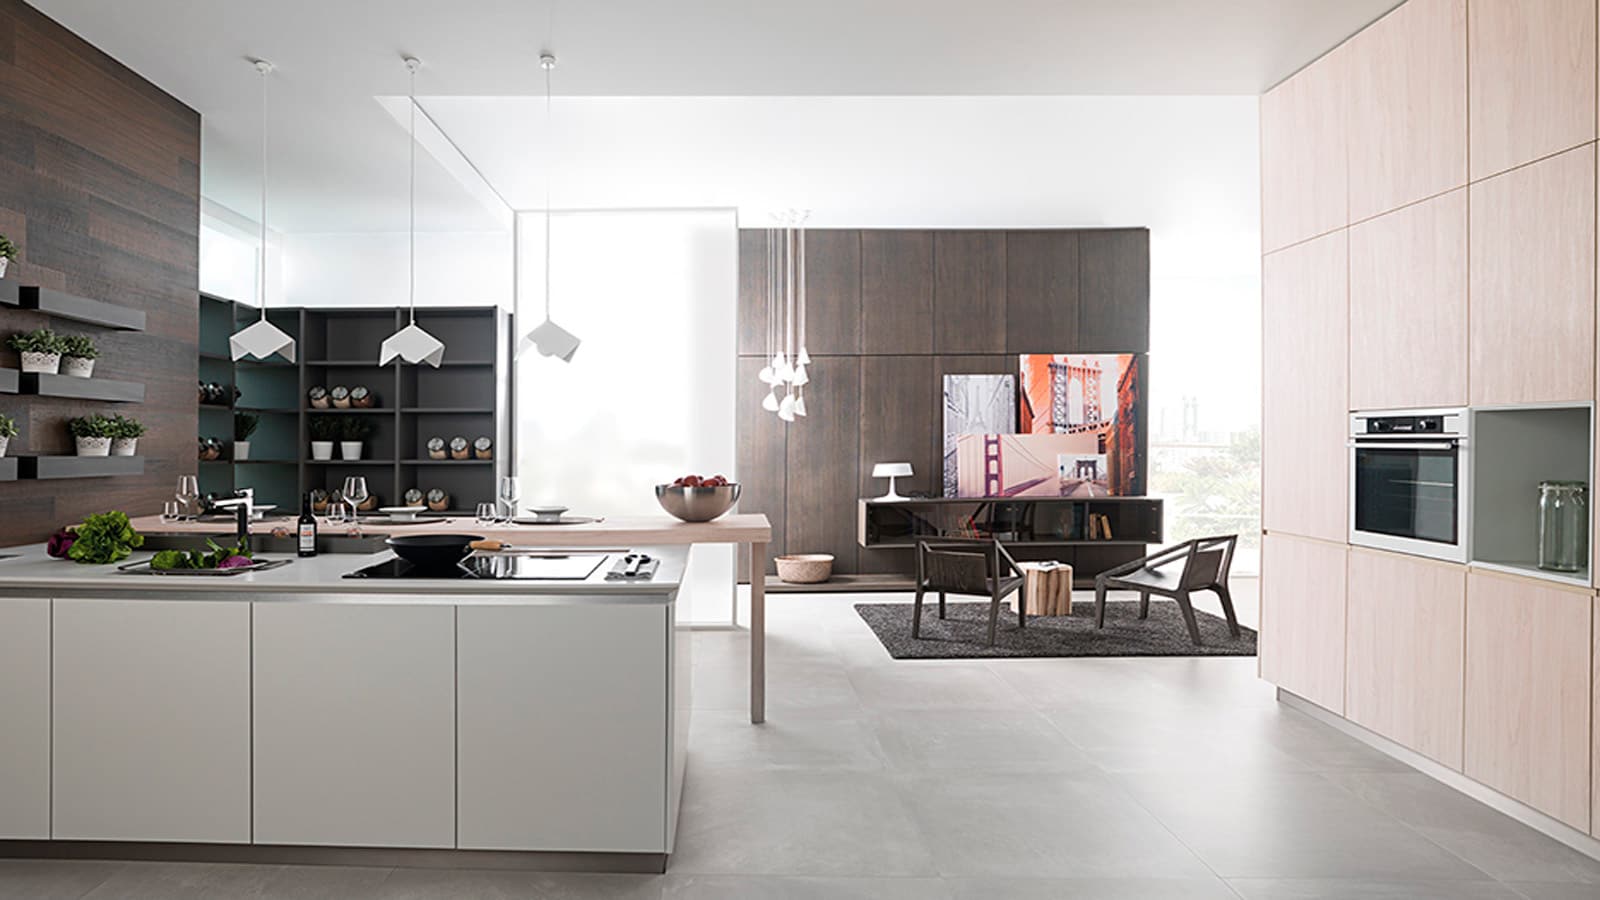 The Smart Kitchen: Introducing technology into the home